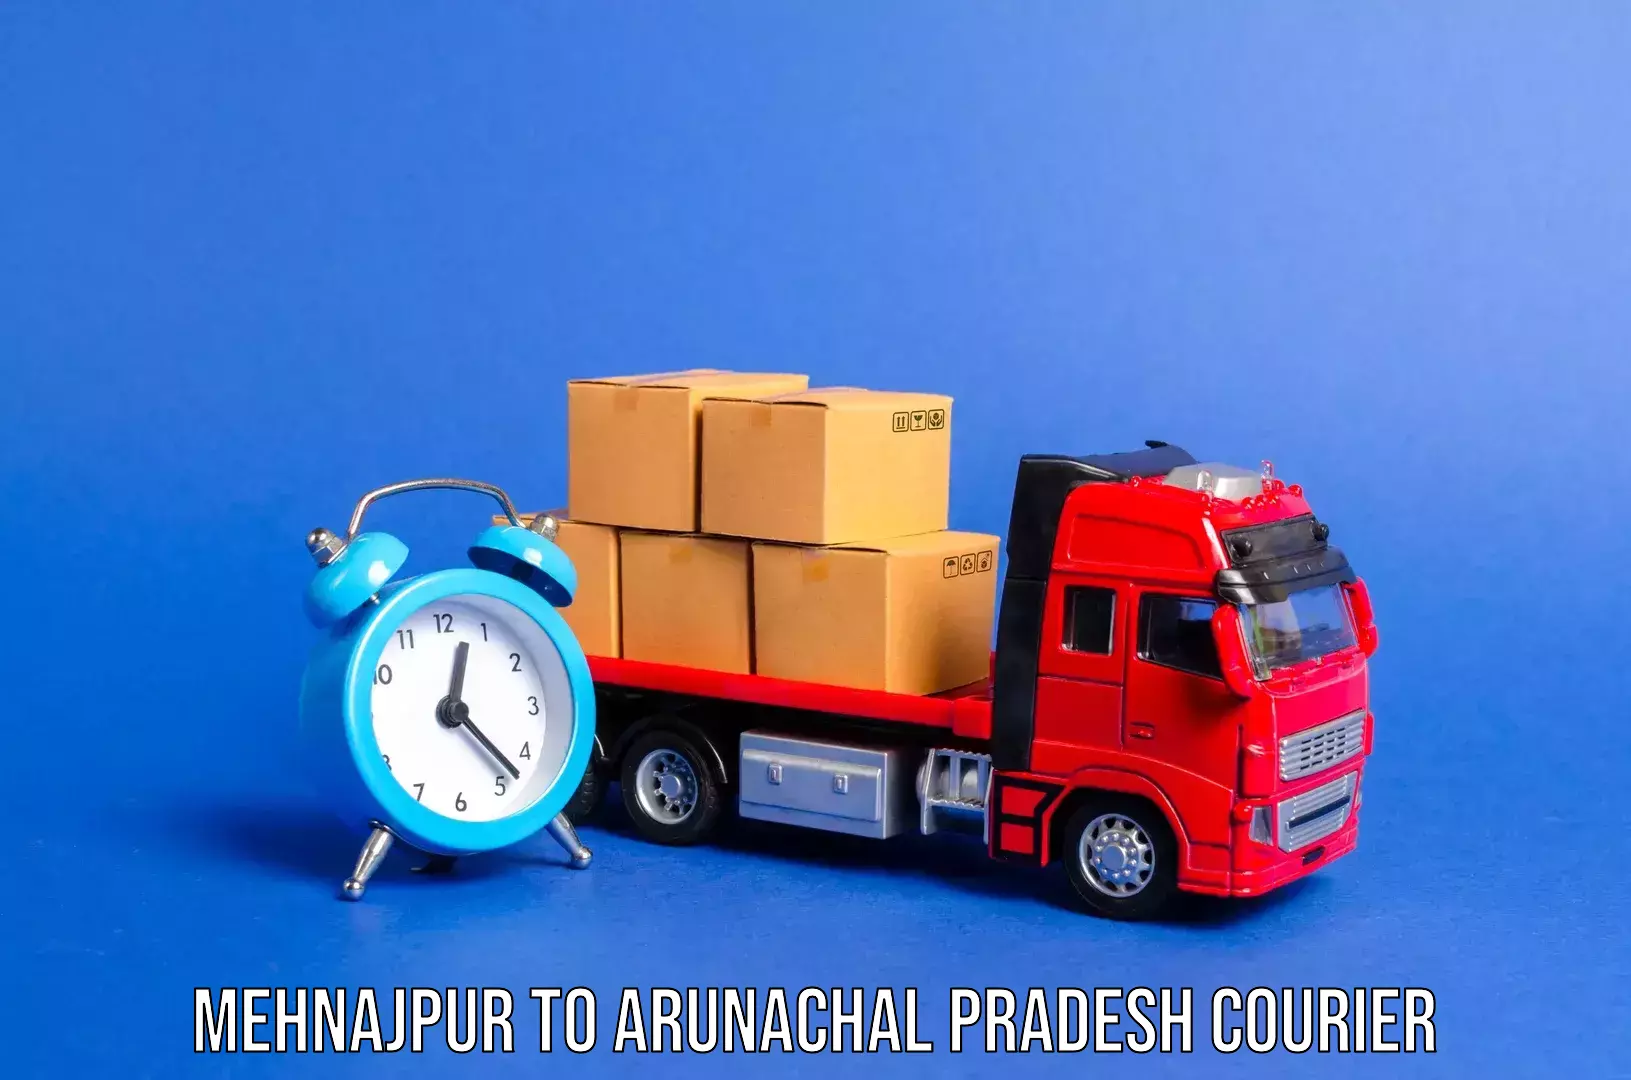 Luggage shipping specialists Mehnajpur to Lohit